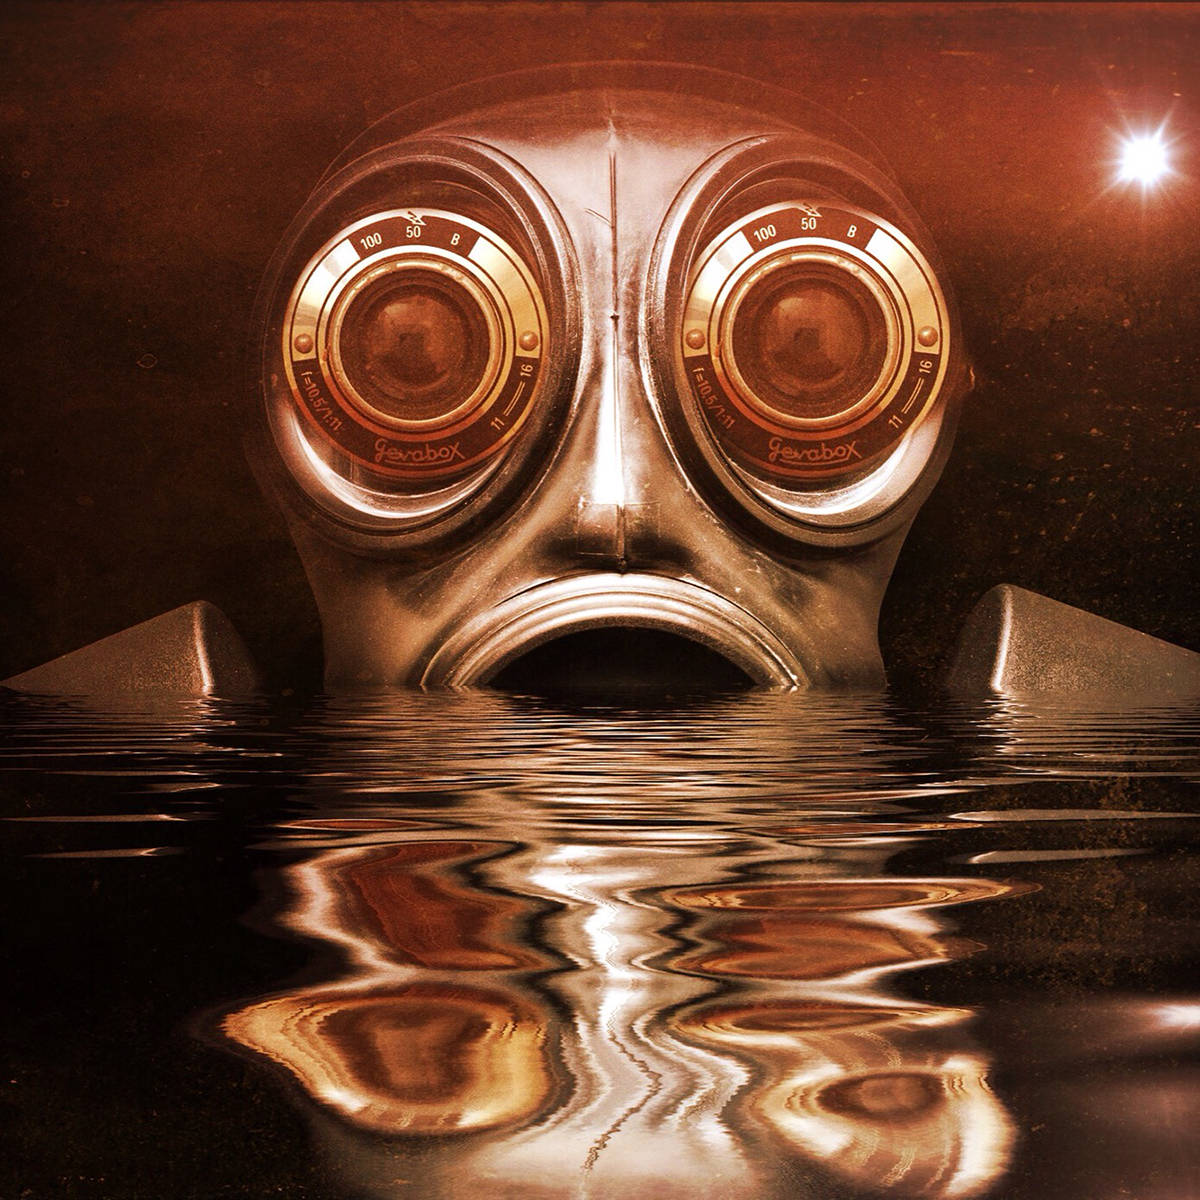 surreal gas mask reflection apps #MakeItNYC